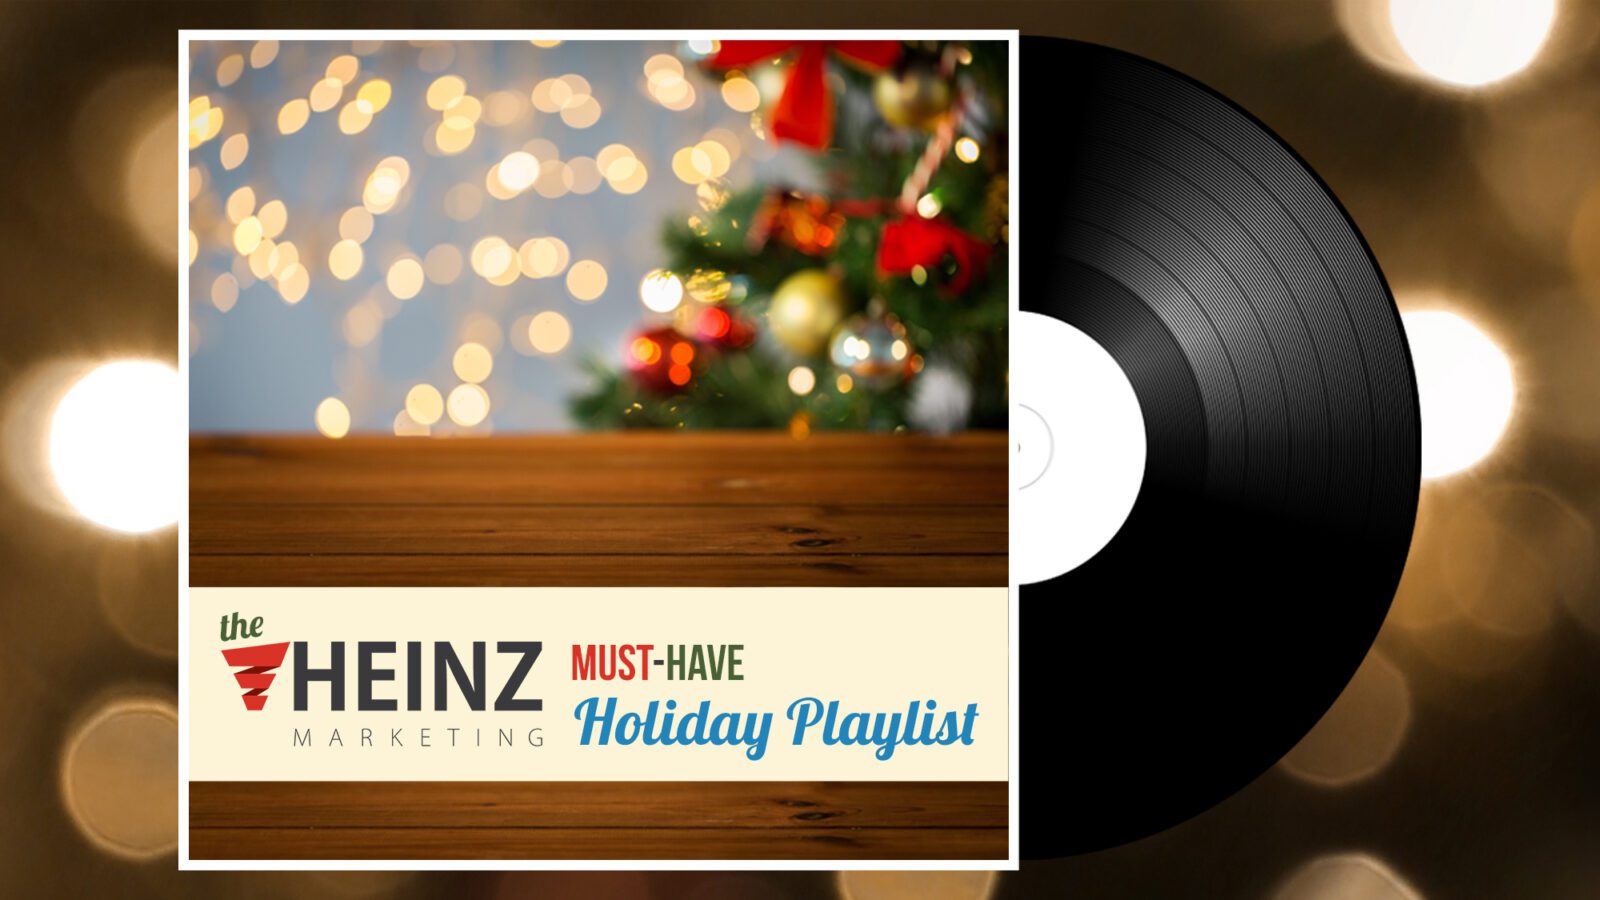 The Heinz Marketing Must-Have Holiday Playlist 2018